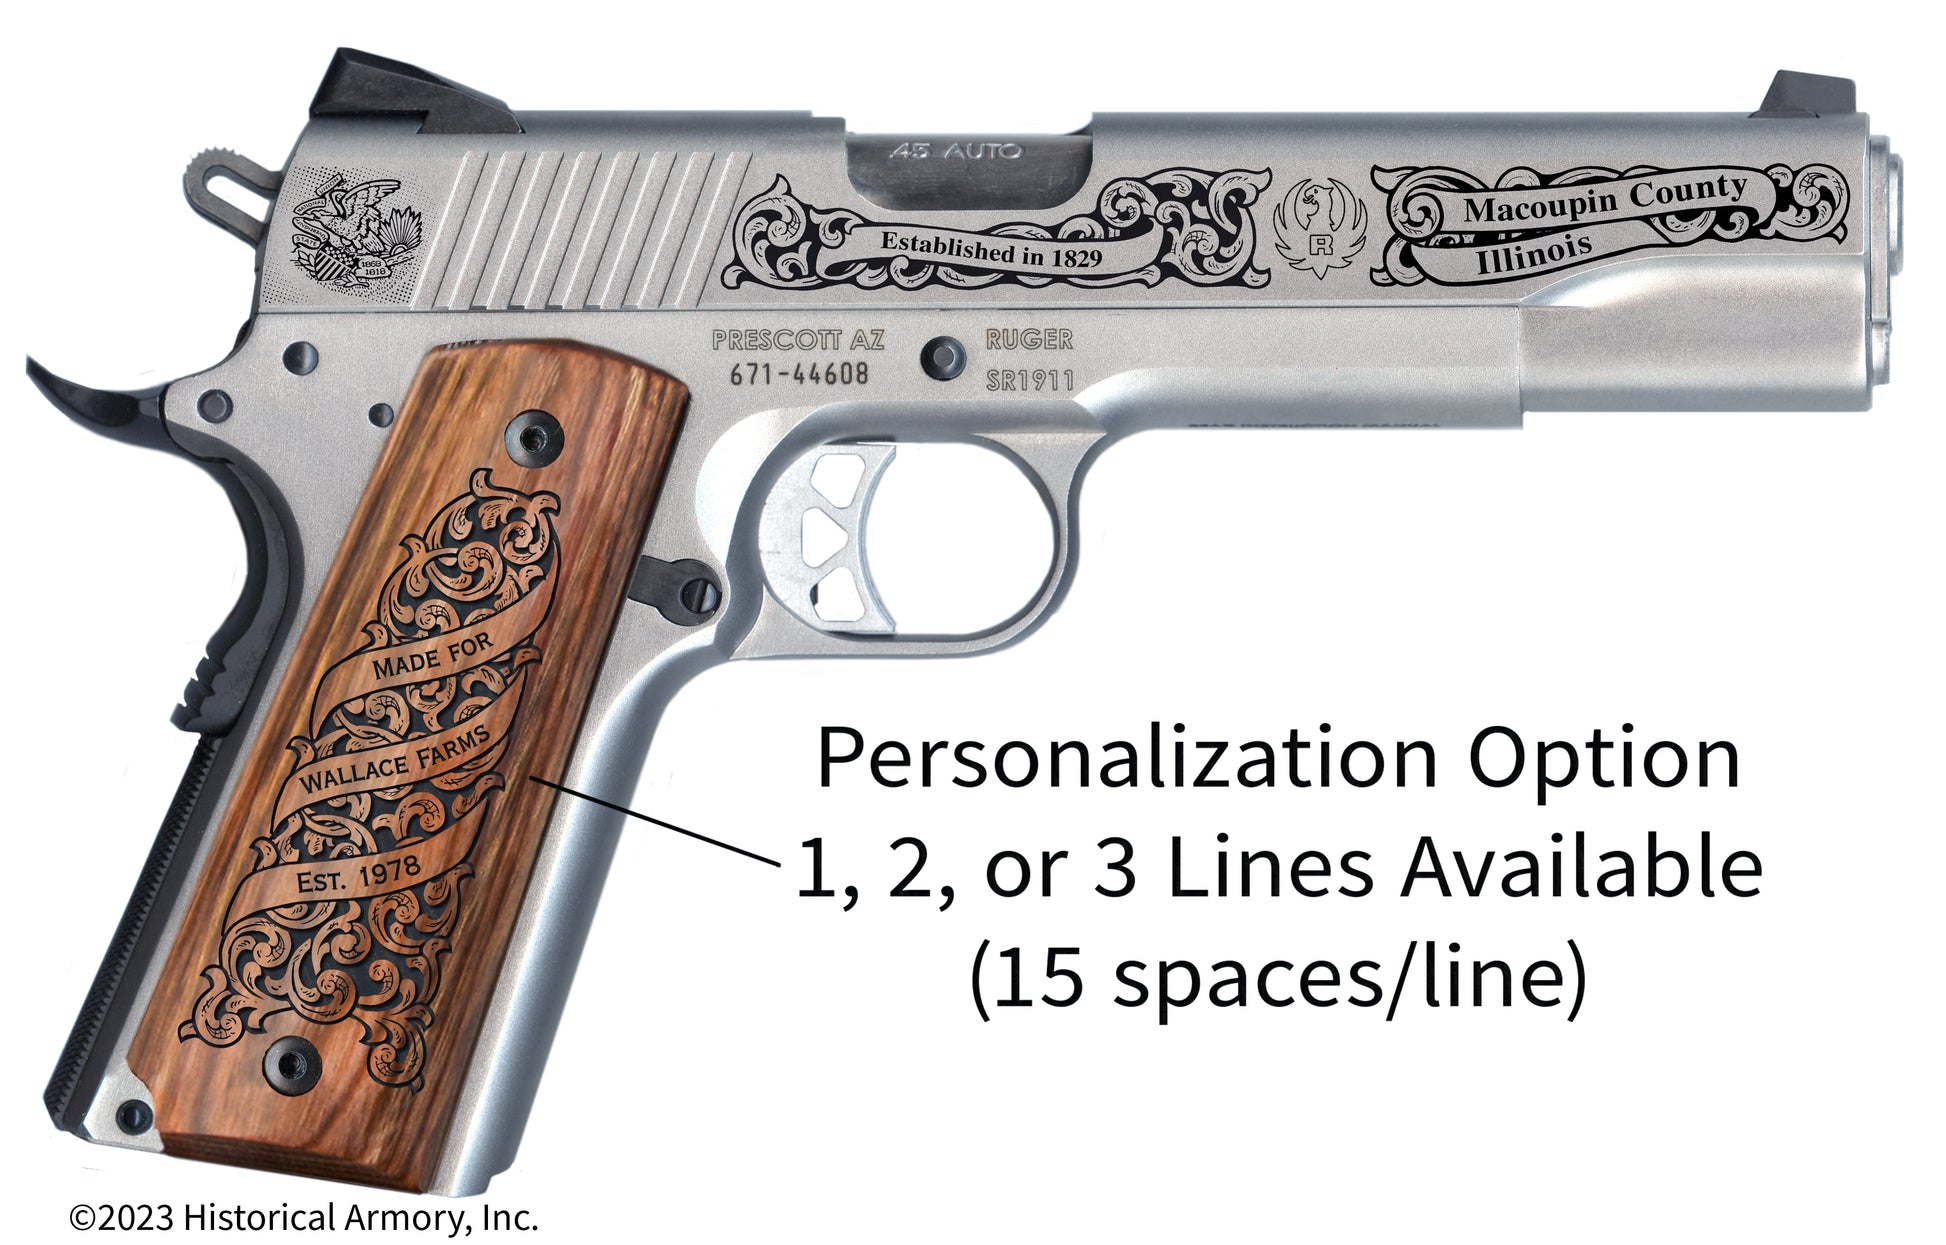 Macoupin County Illinois Personalized Engraved .45 Auto Ruger 1911